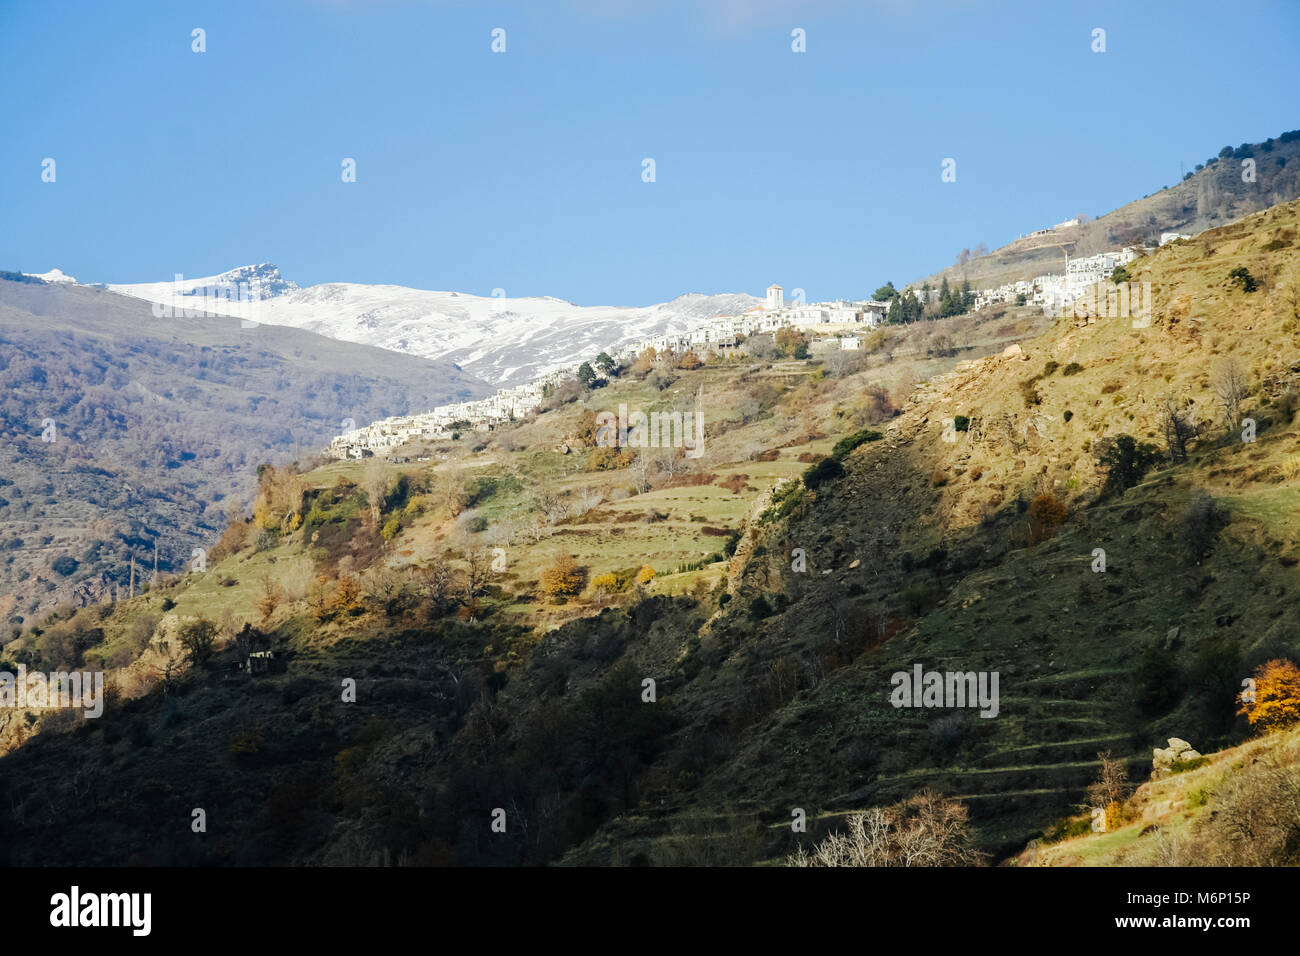 View of whitewashed Capileira village with snow-capped Sierra Nevada peaks in background in  Las Alpujarras, Granada province, Andalusia, Spain Stock Photo